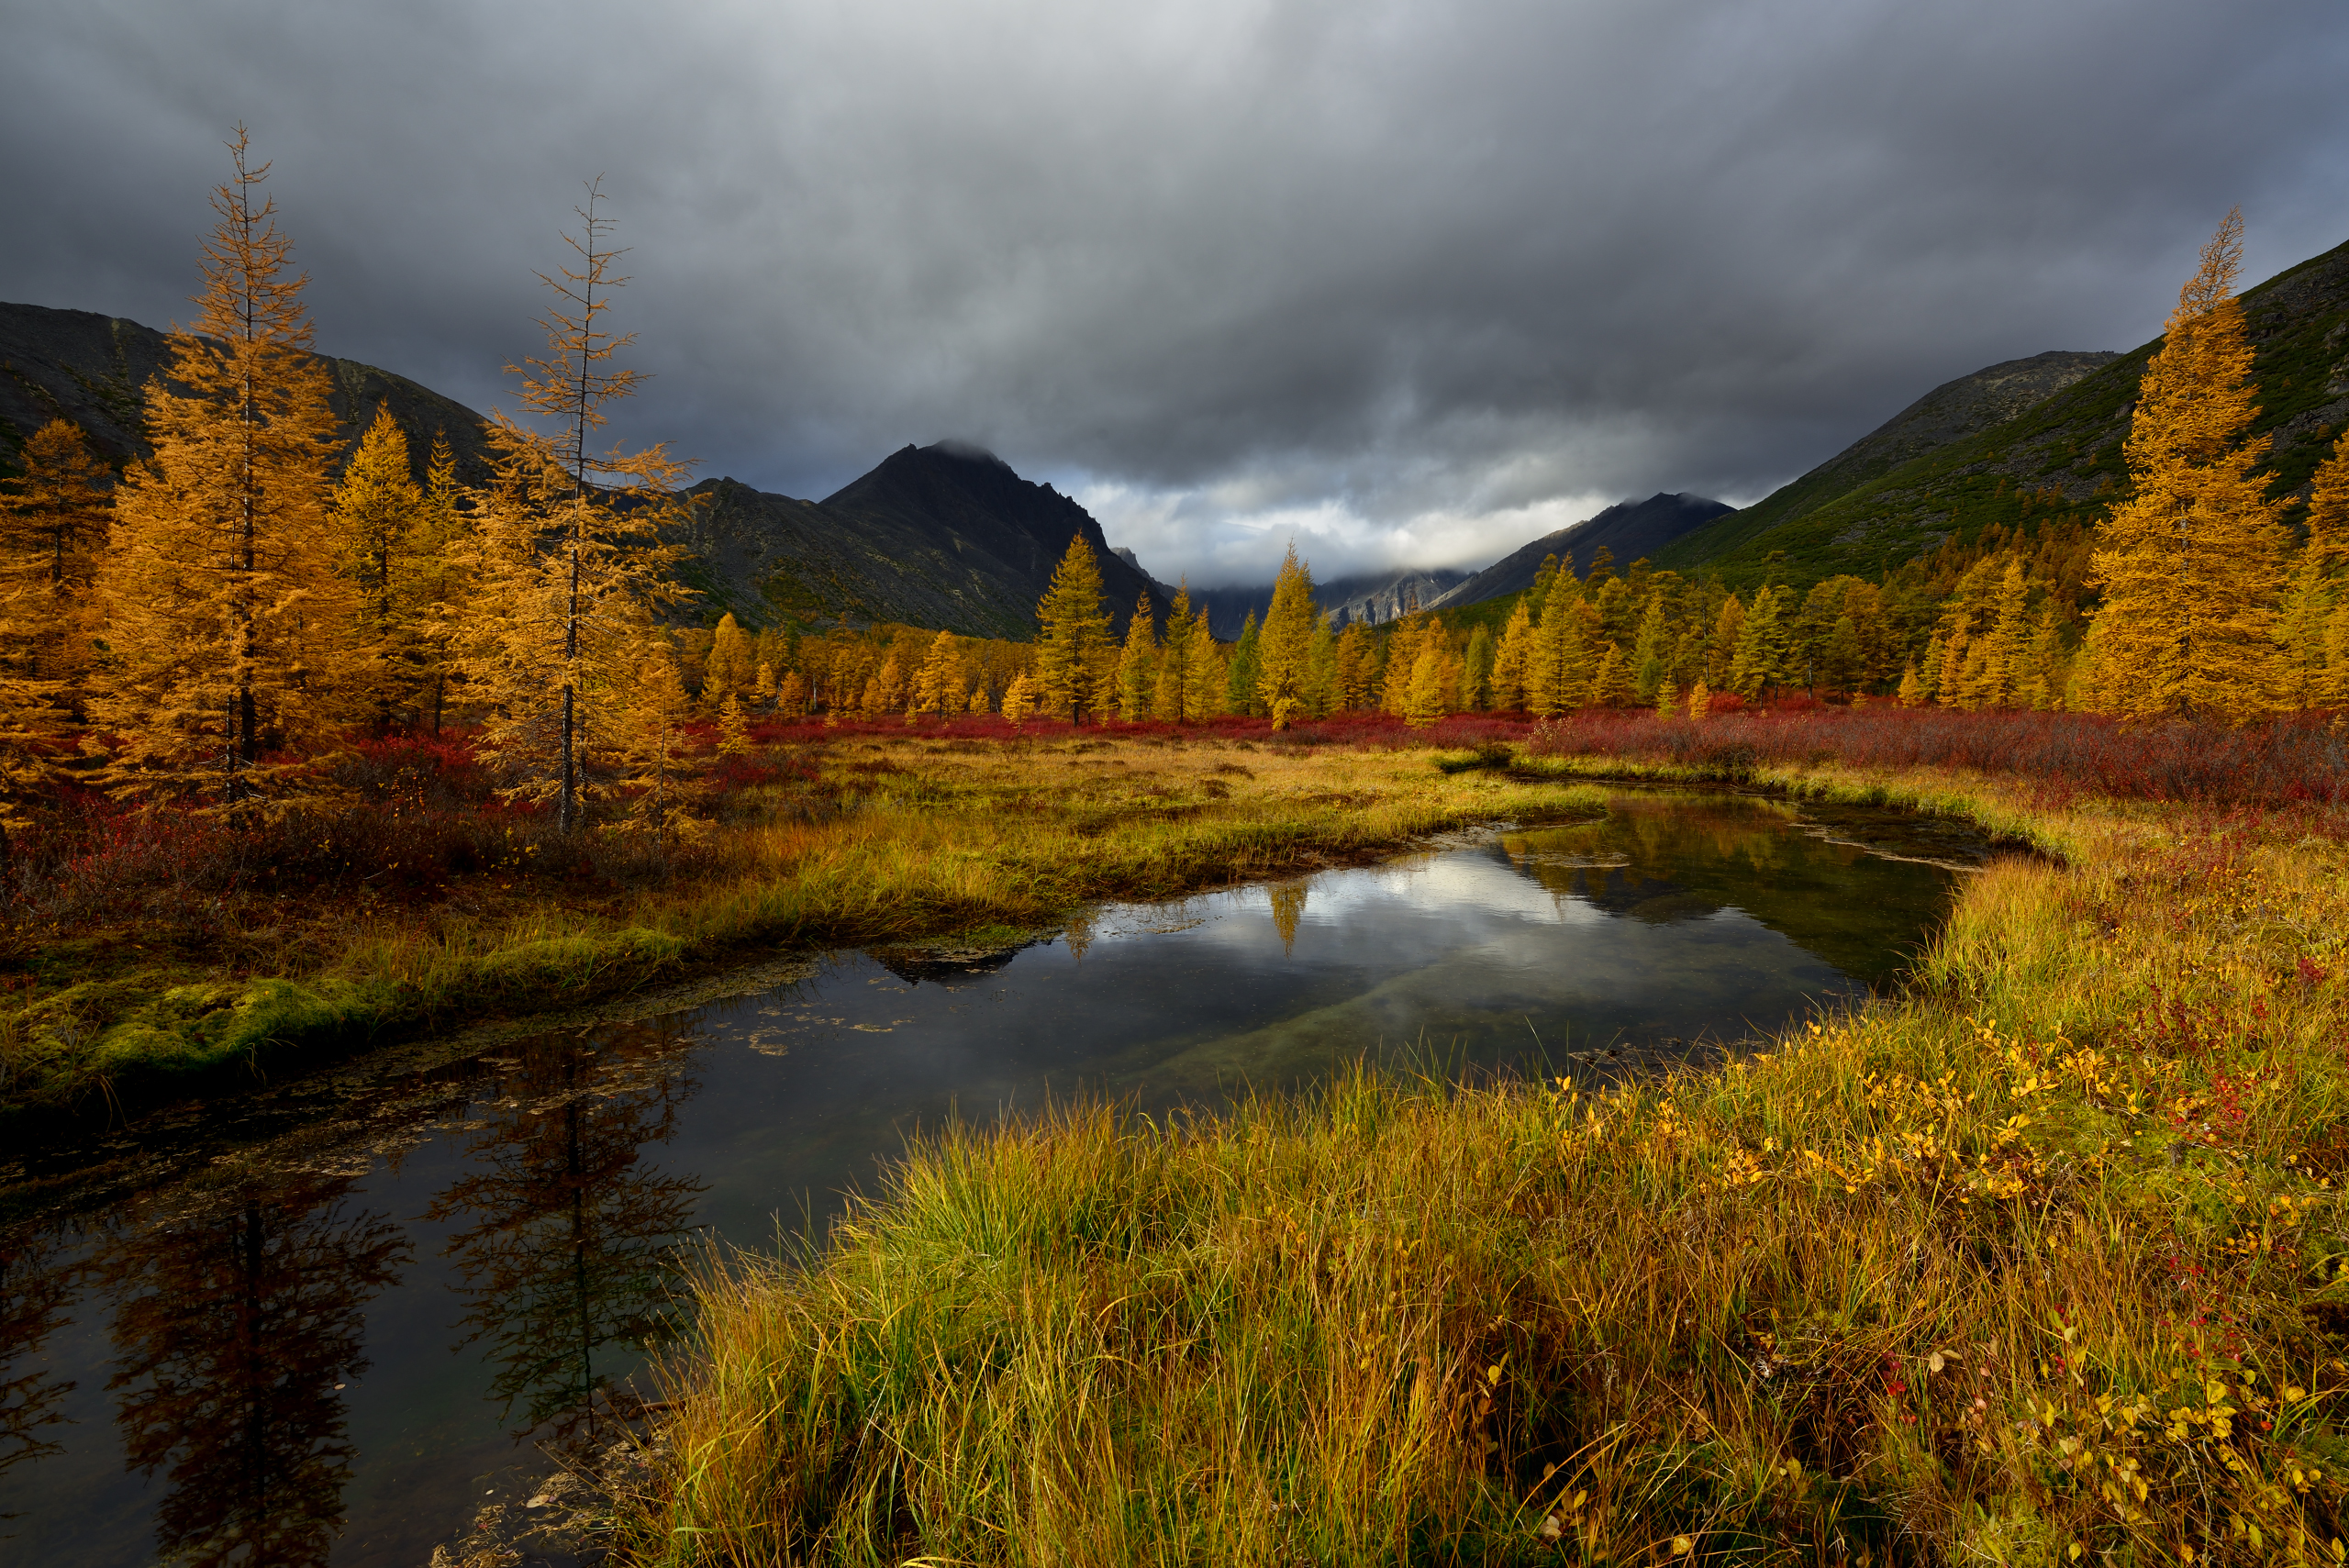 Landscape Mountains Clouds Trees Fall Grass Water Stream Reflection Outdoors River Overcast Maxim Ev 2560x1709